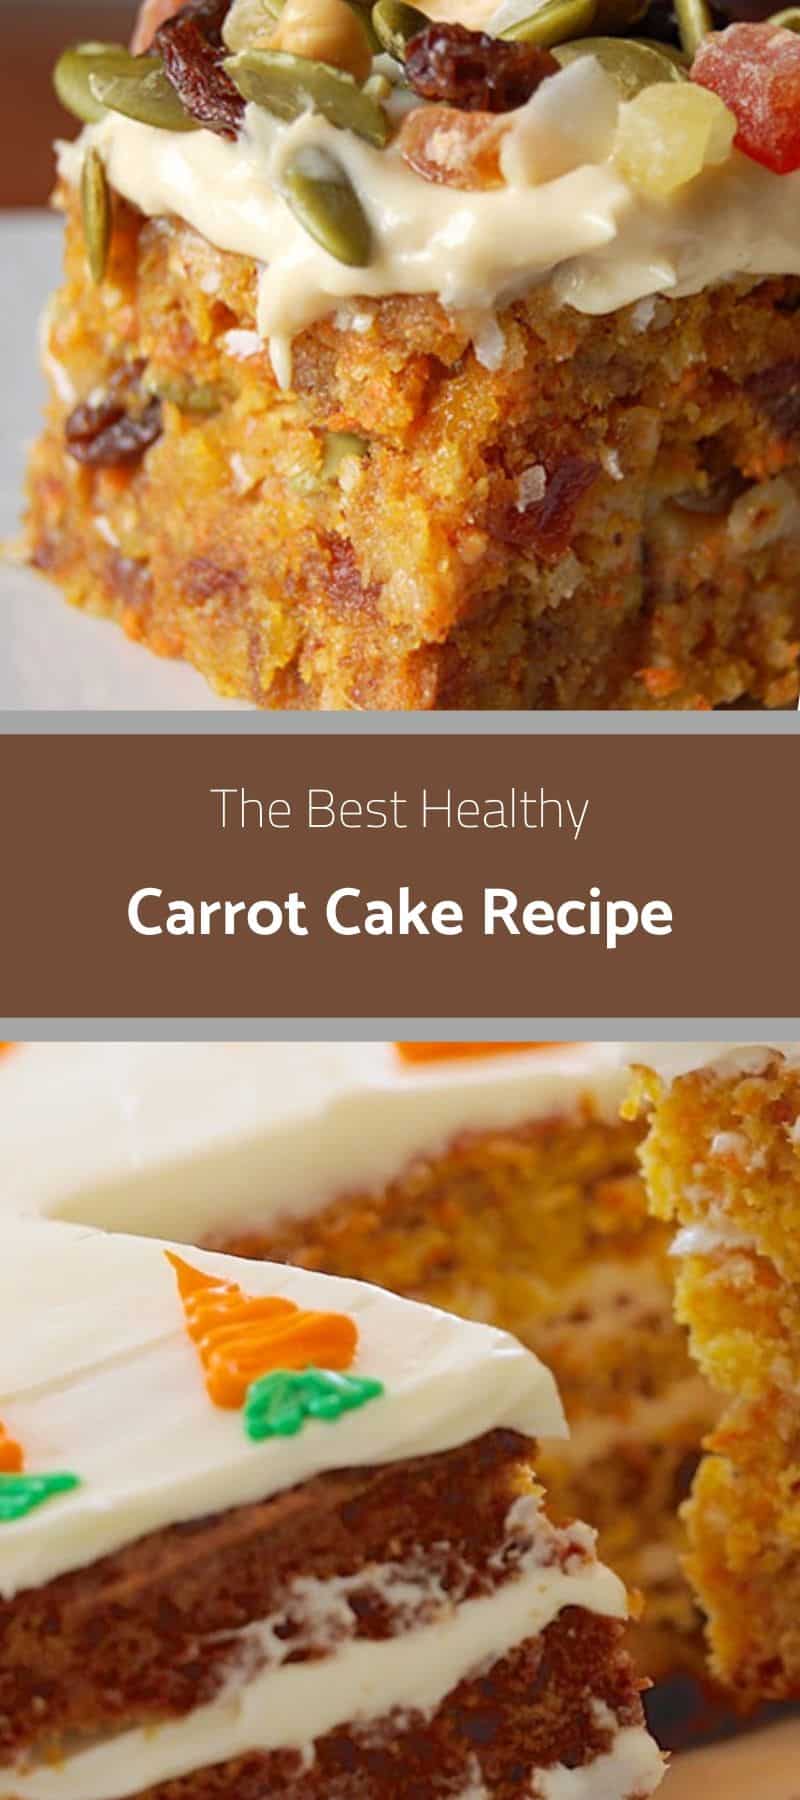 The Best Healthy Carrot Cake Recipe 3